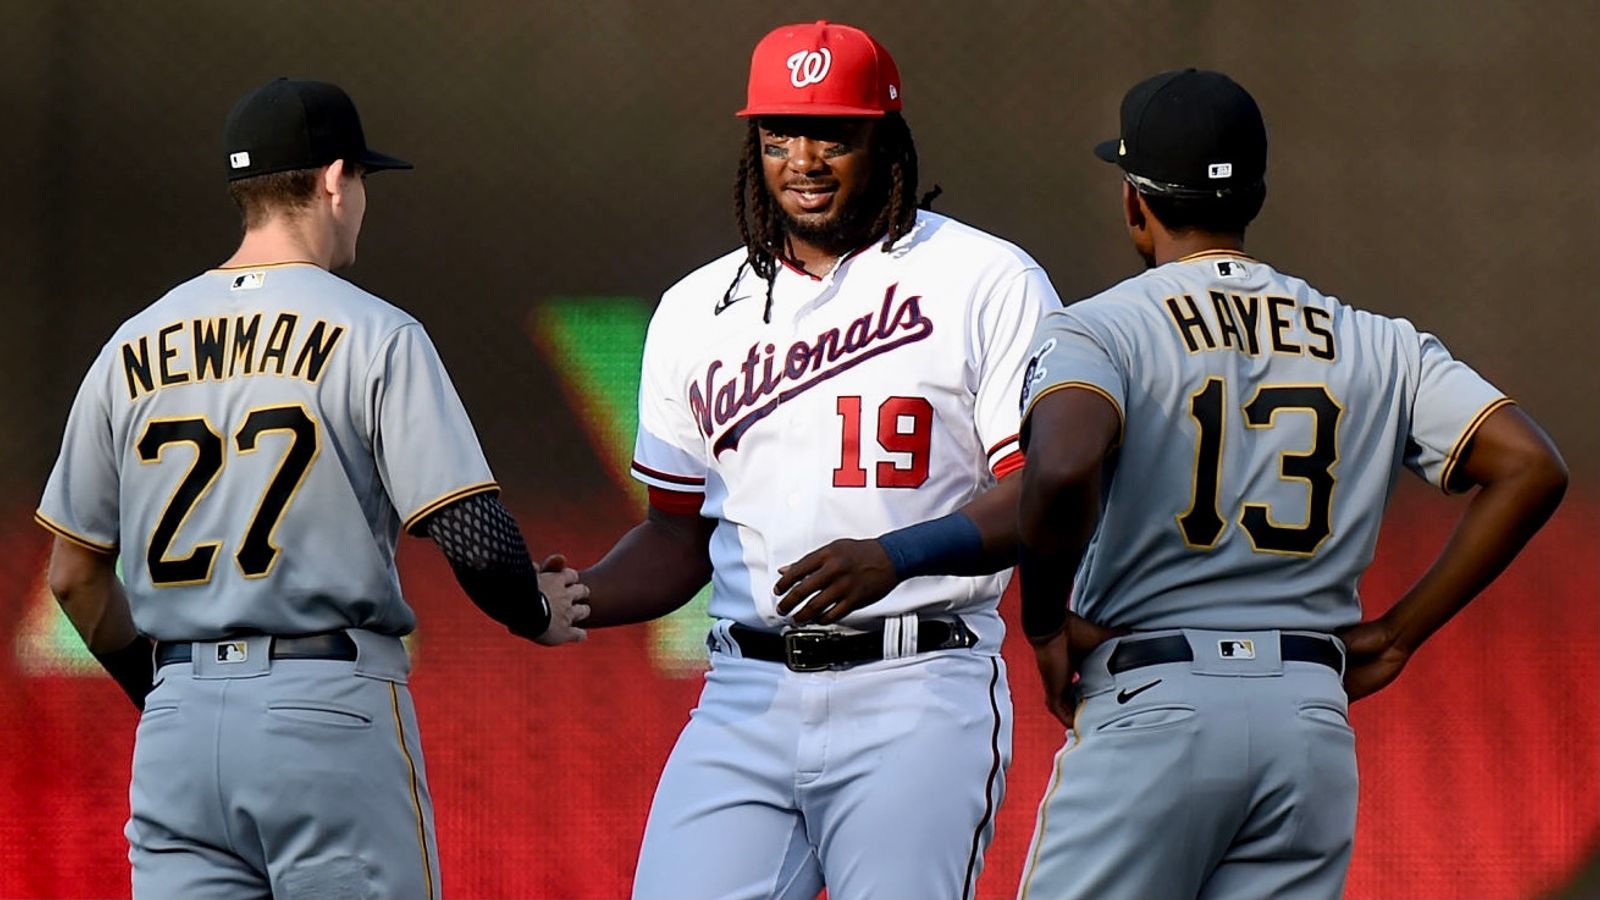 For Josh Bell, fellow former Pirates, it's 'onto the next chapter